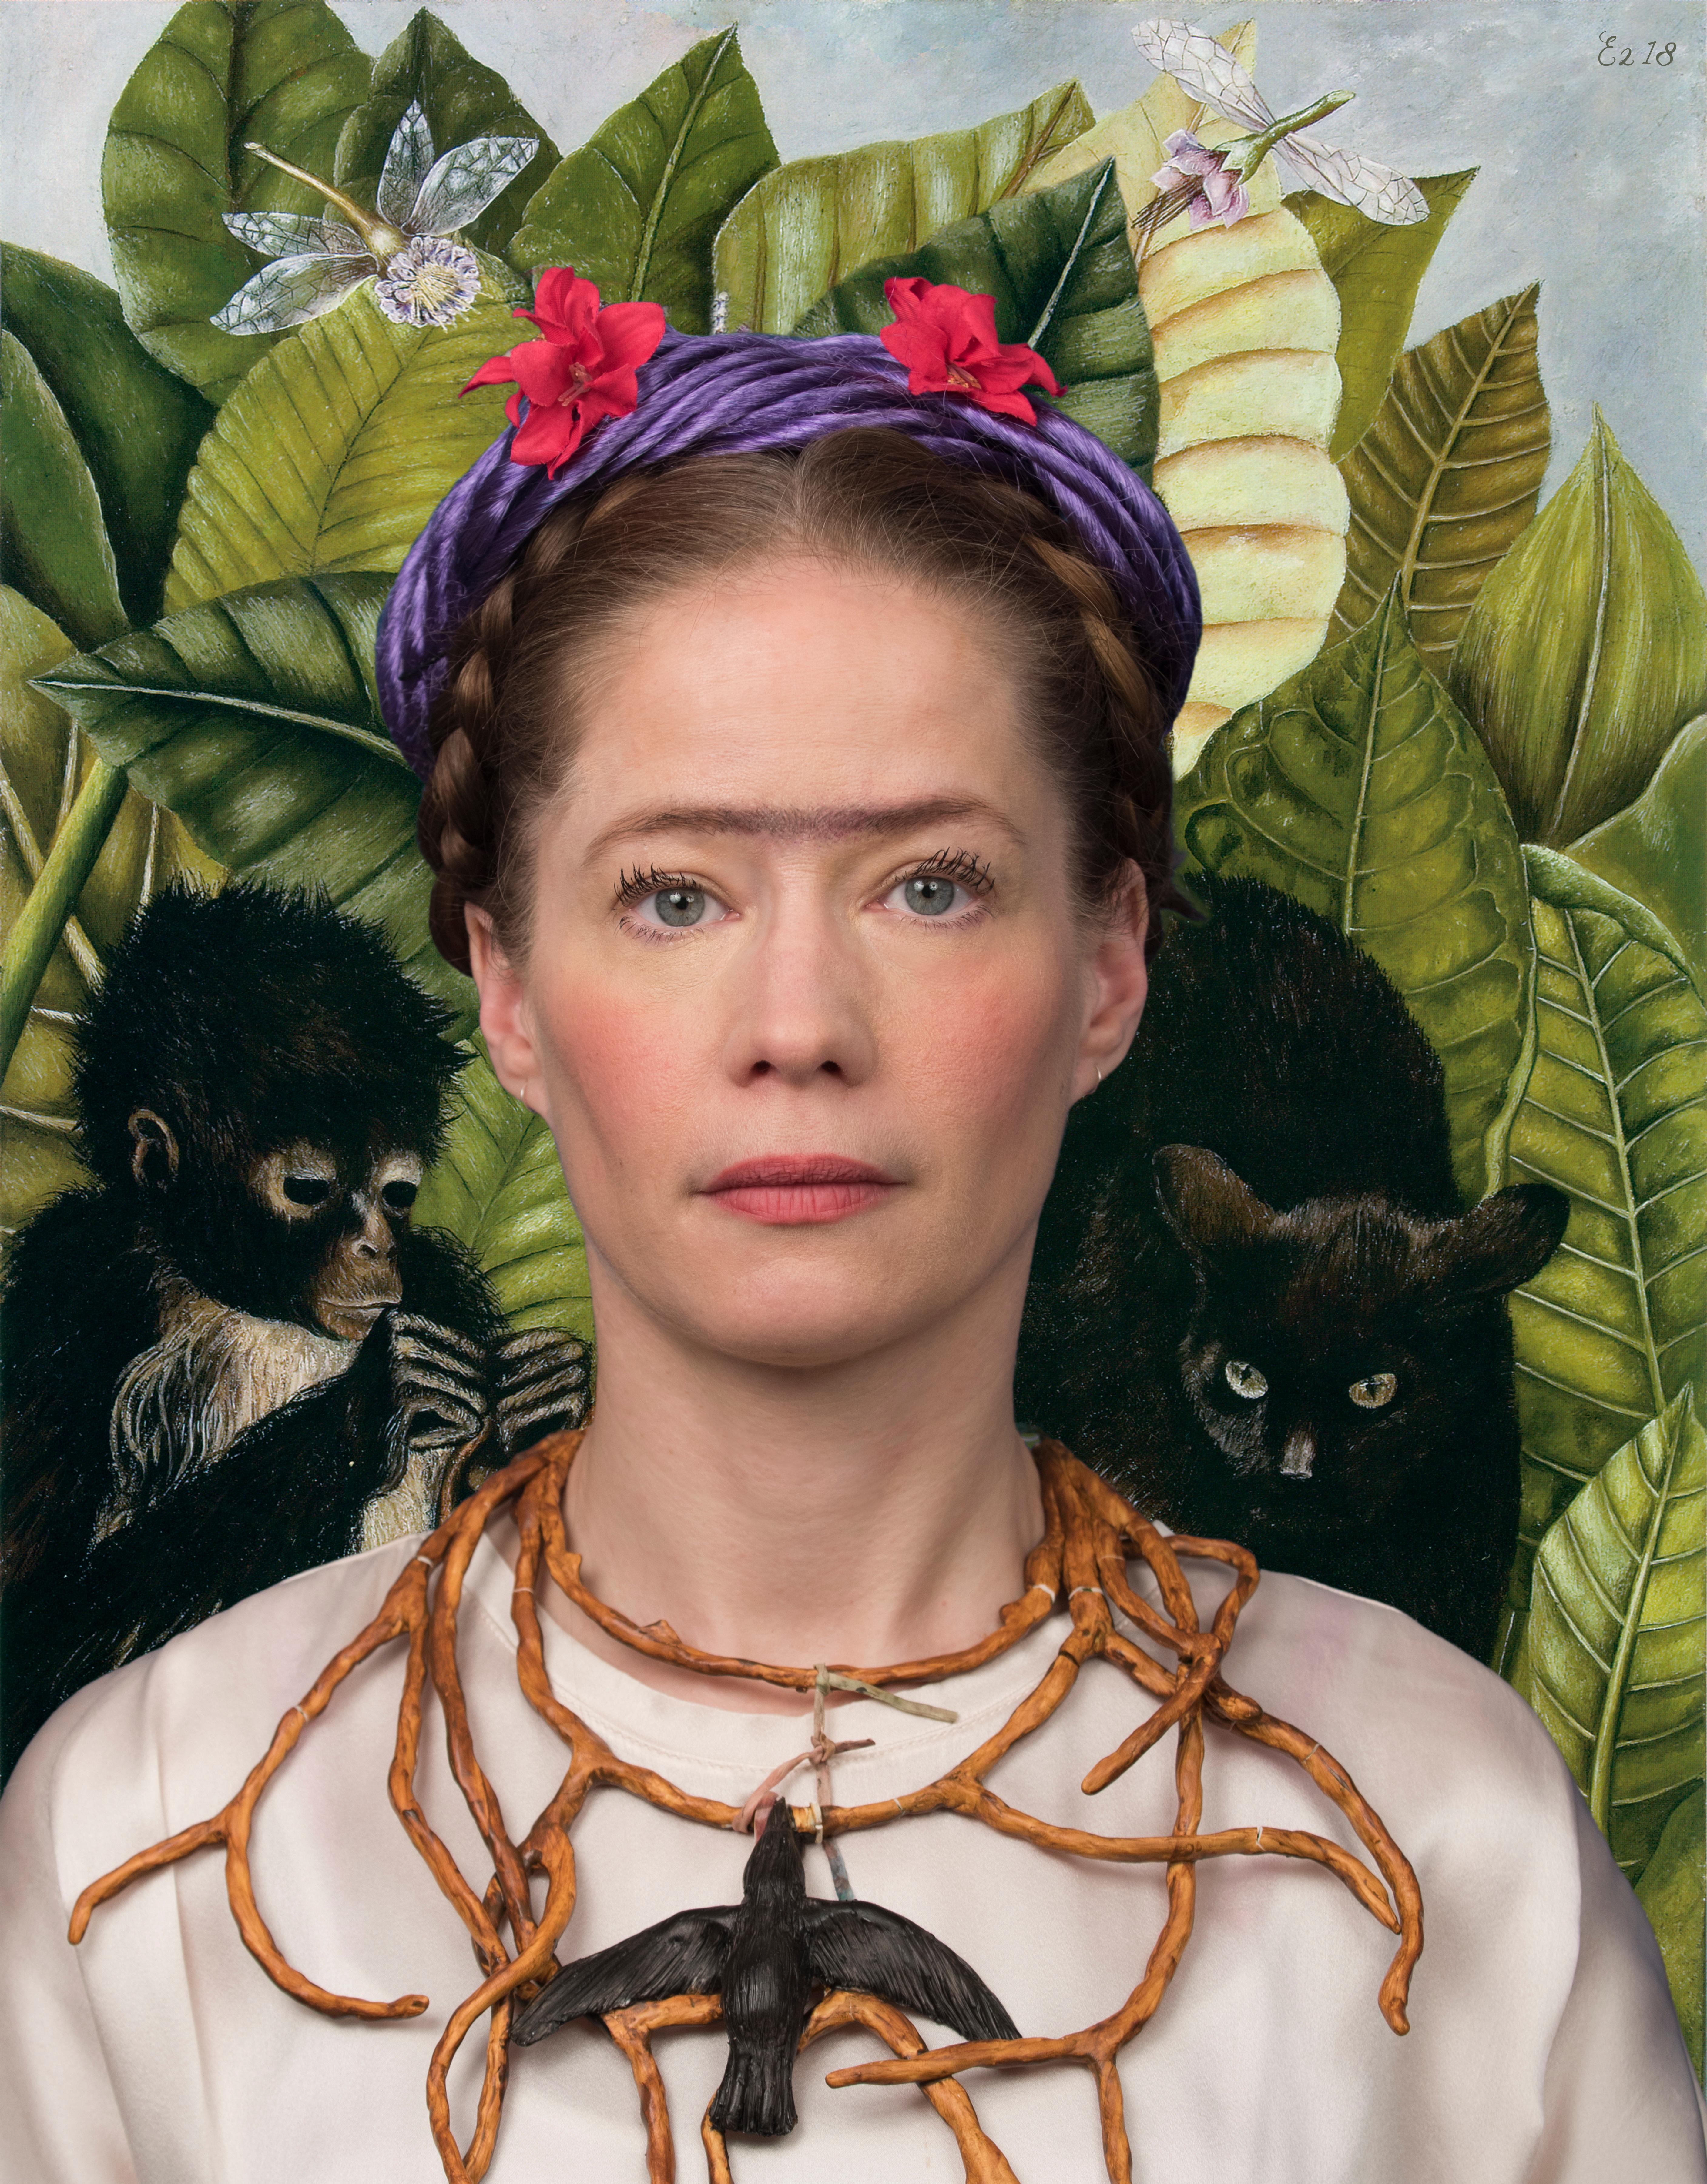 E2 - Kleinveld & Julien Portrait Photograph - Ode to Frida Kahlo's Self-Portrait with Thorn Necklace and Hummingbird